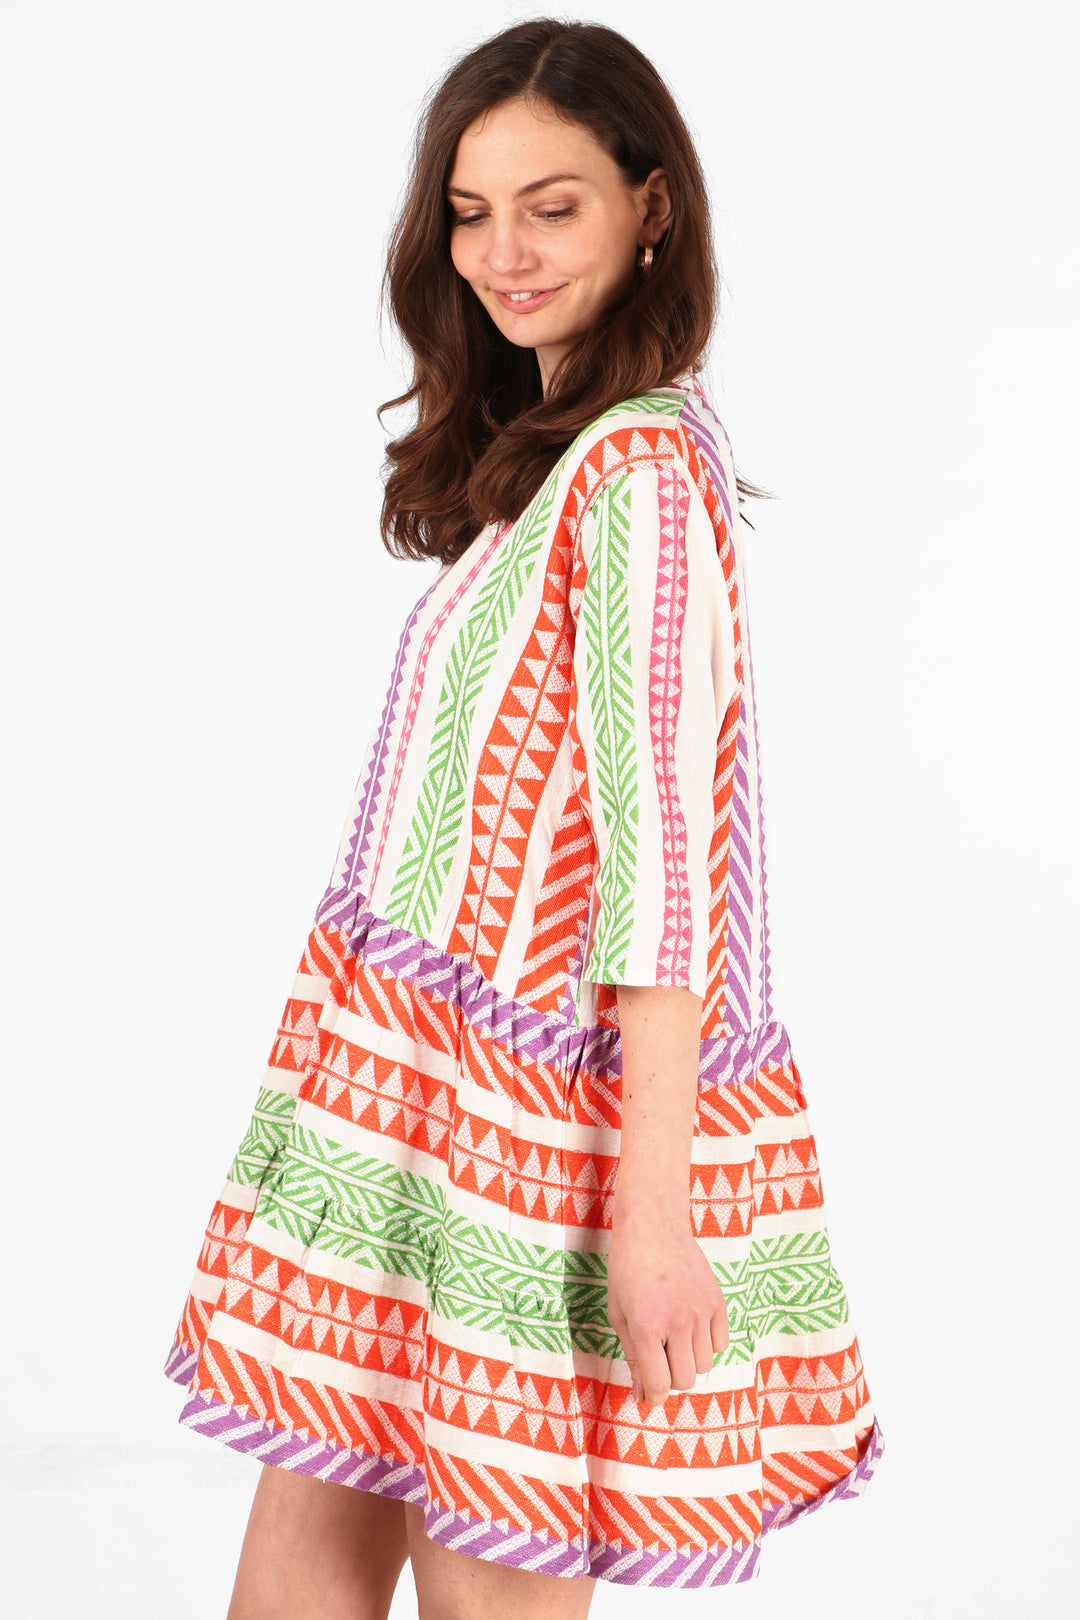 model showing the side view of the mini dress, showing the 3/4 sleeves and multi-coloured aztec pattern